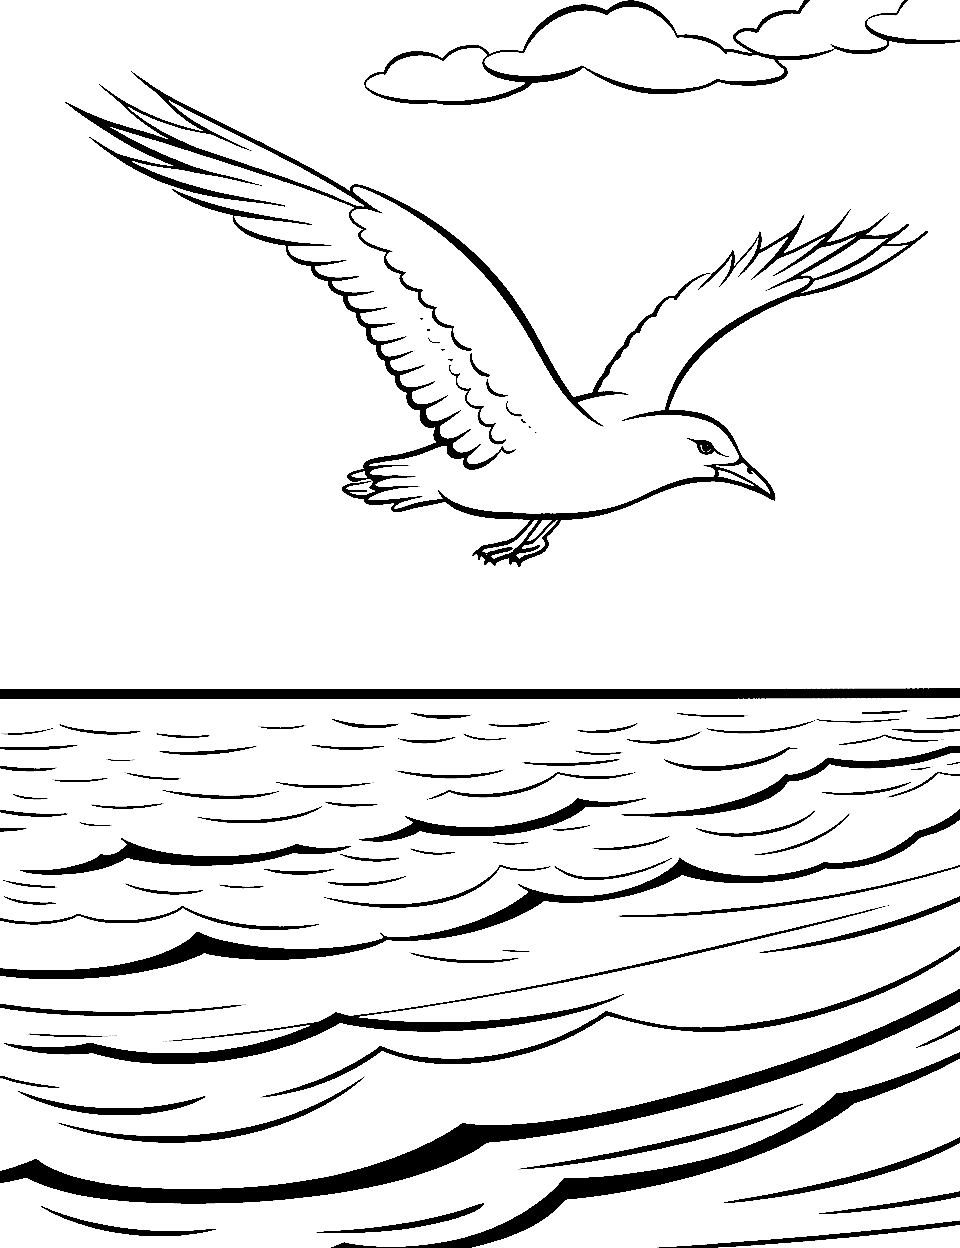 Artistic Seagull in Flight Coloring Page - A solitary seagull flying above the gentle ocean waves.